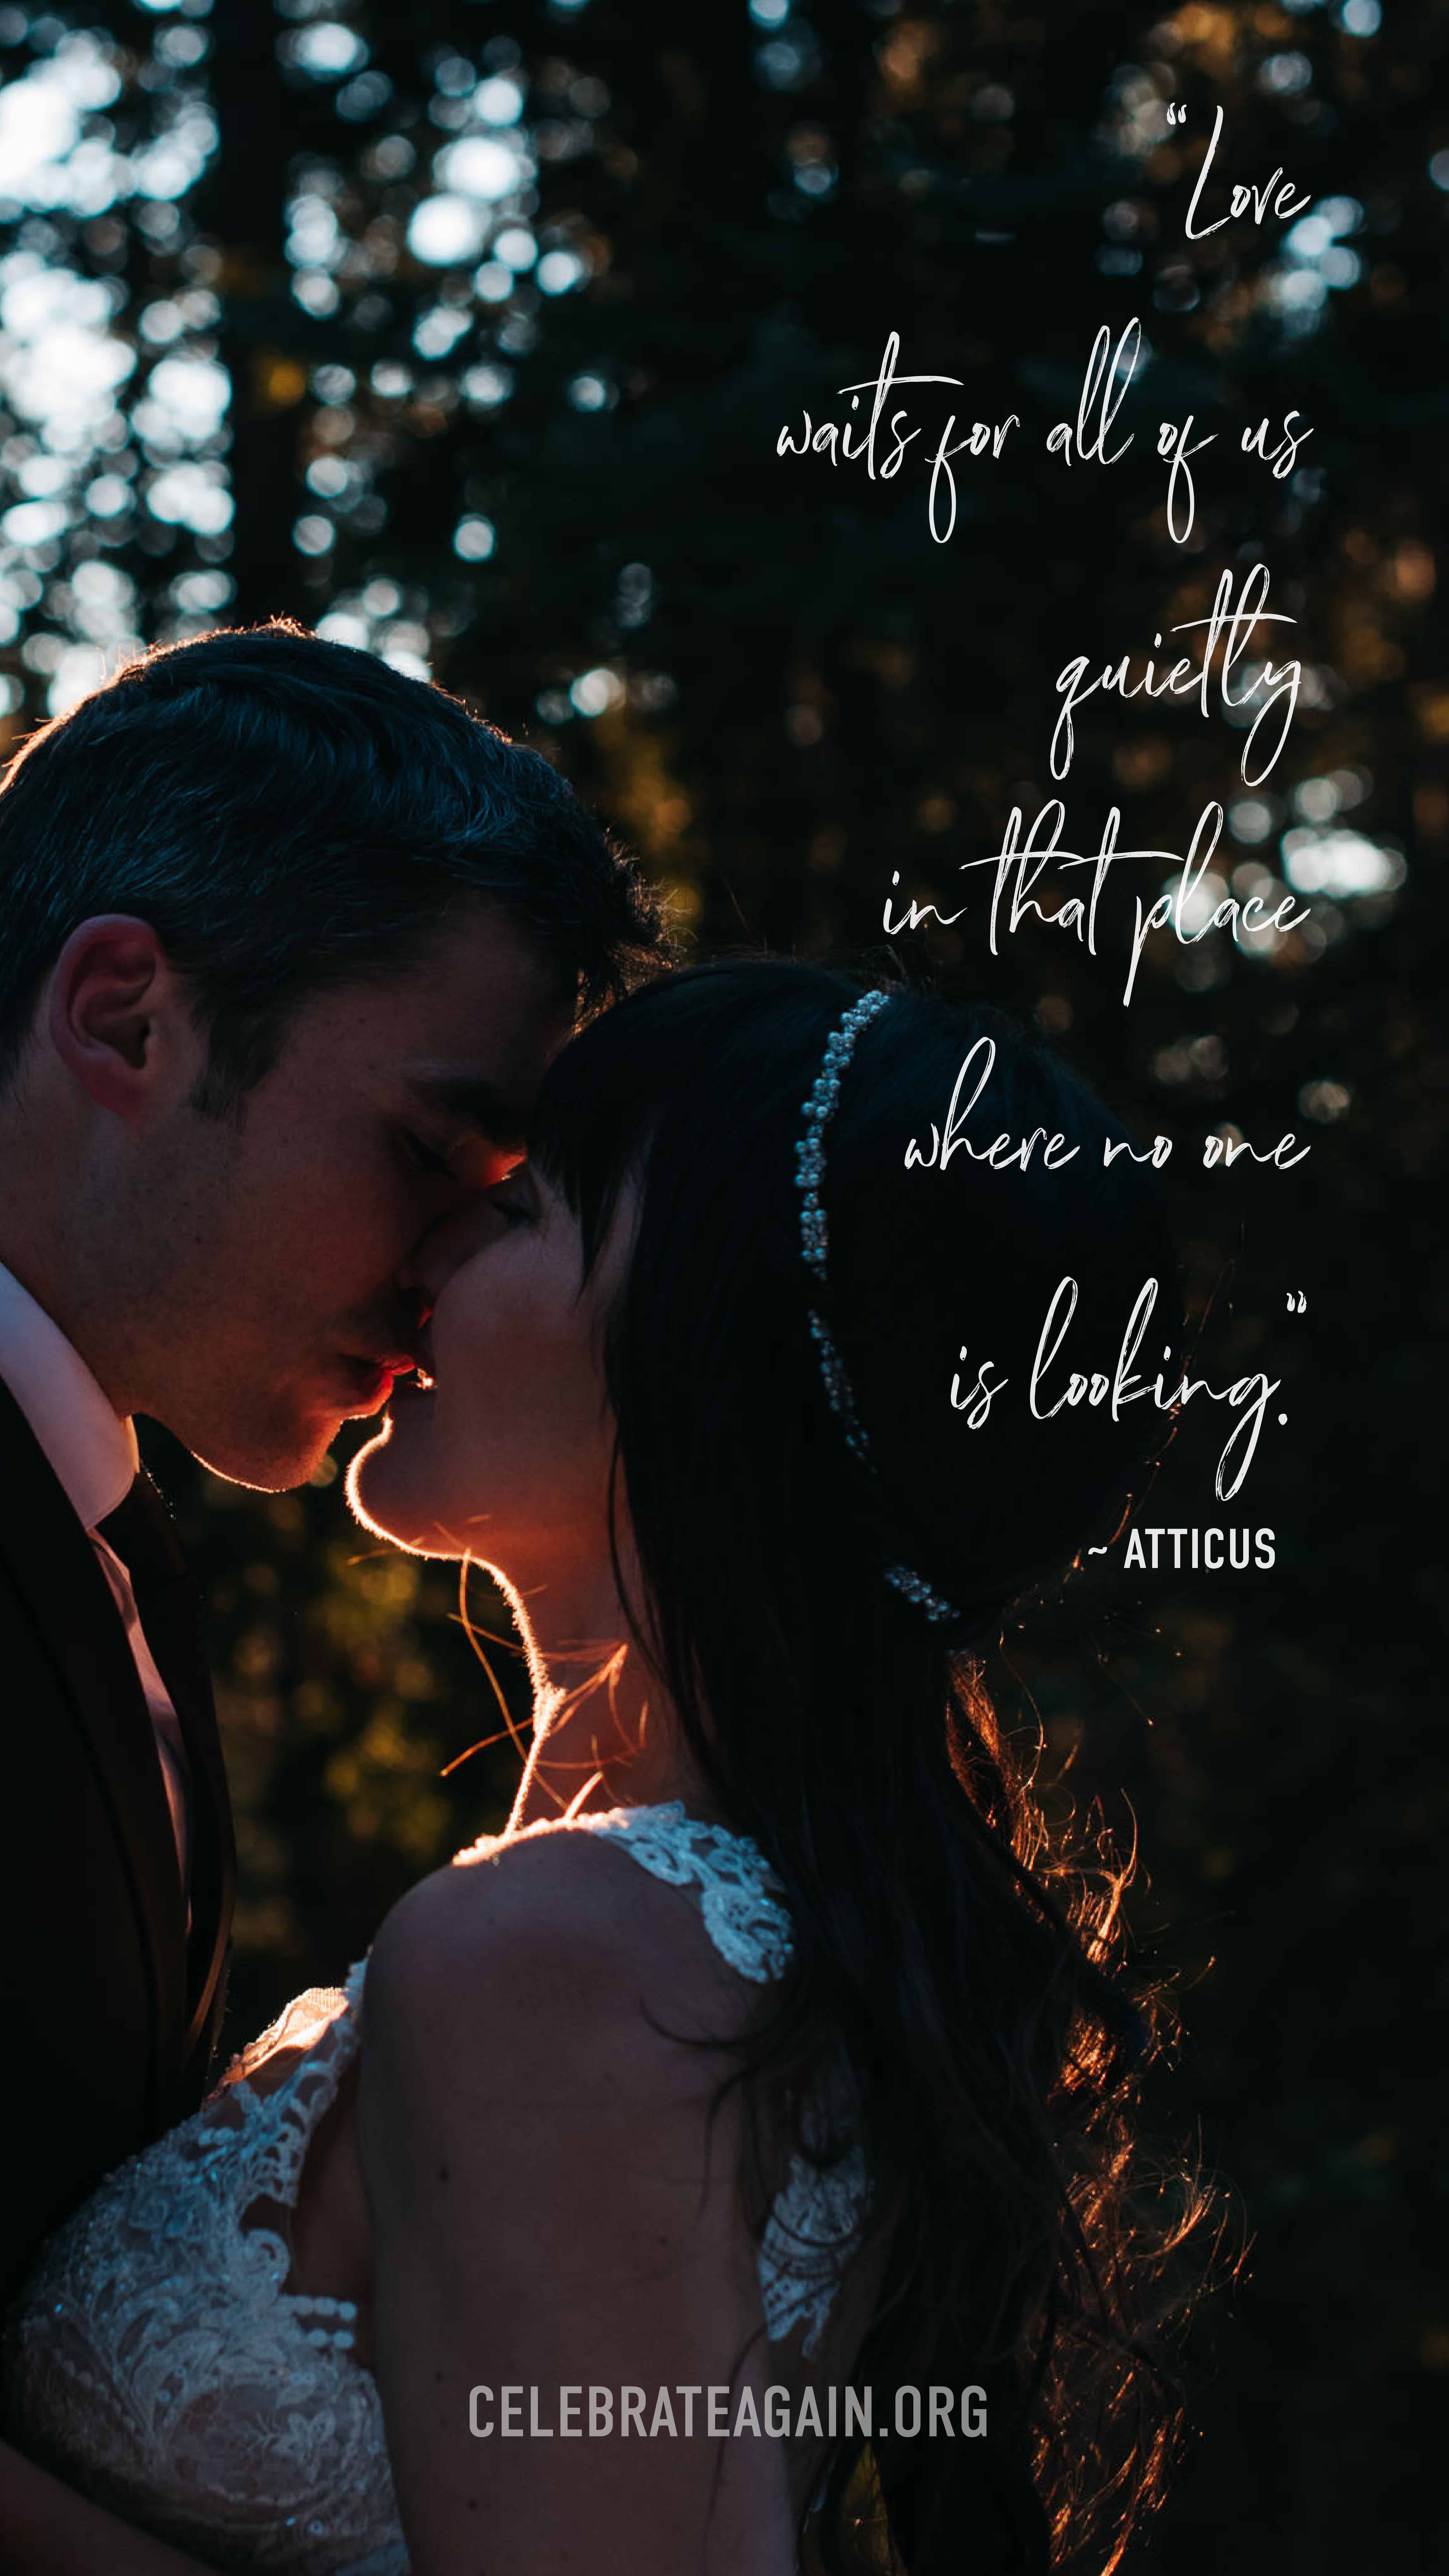 romantic love quote “Love waits for all of us quietly in that place where no one is looking.” ― Atticus Poetry, The Truth About Magic image of bridal couple kissing as the sun slightly illuminates them image by celebrateagain